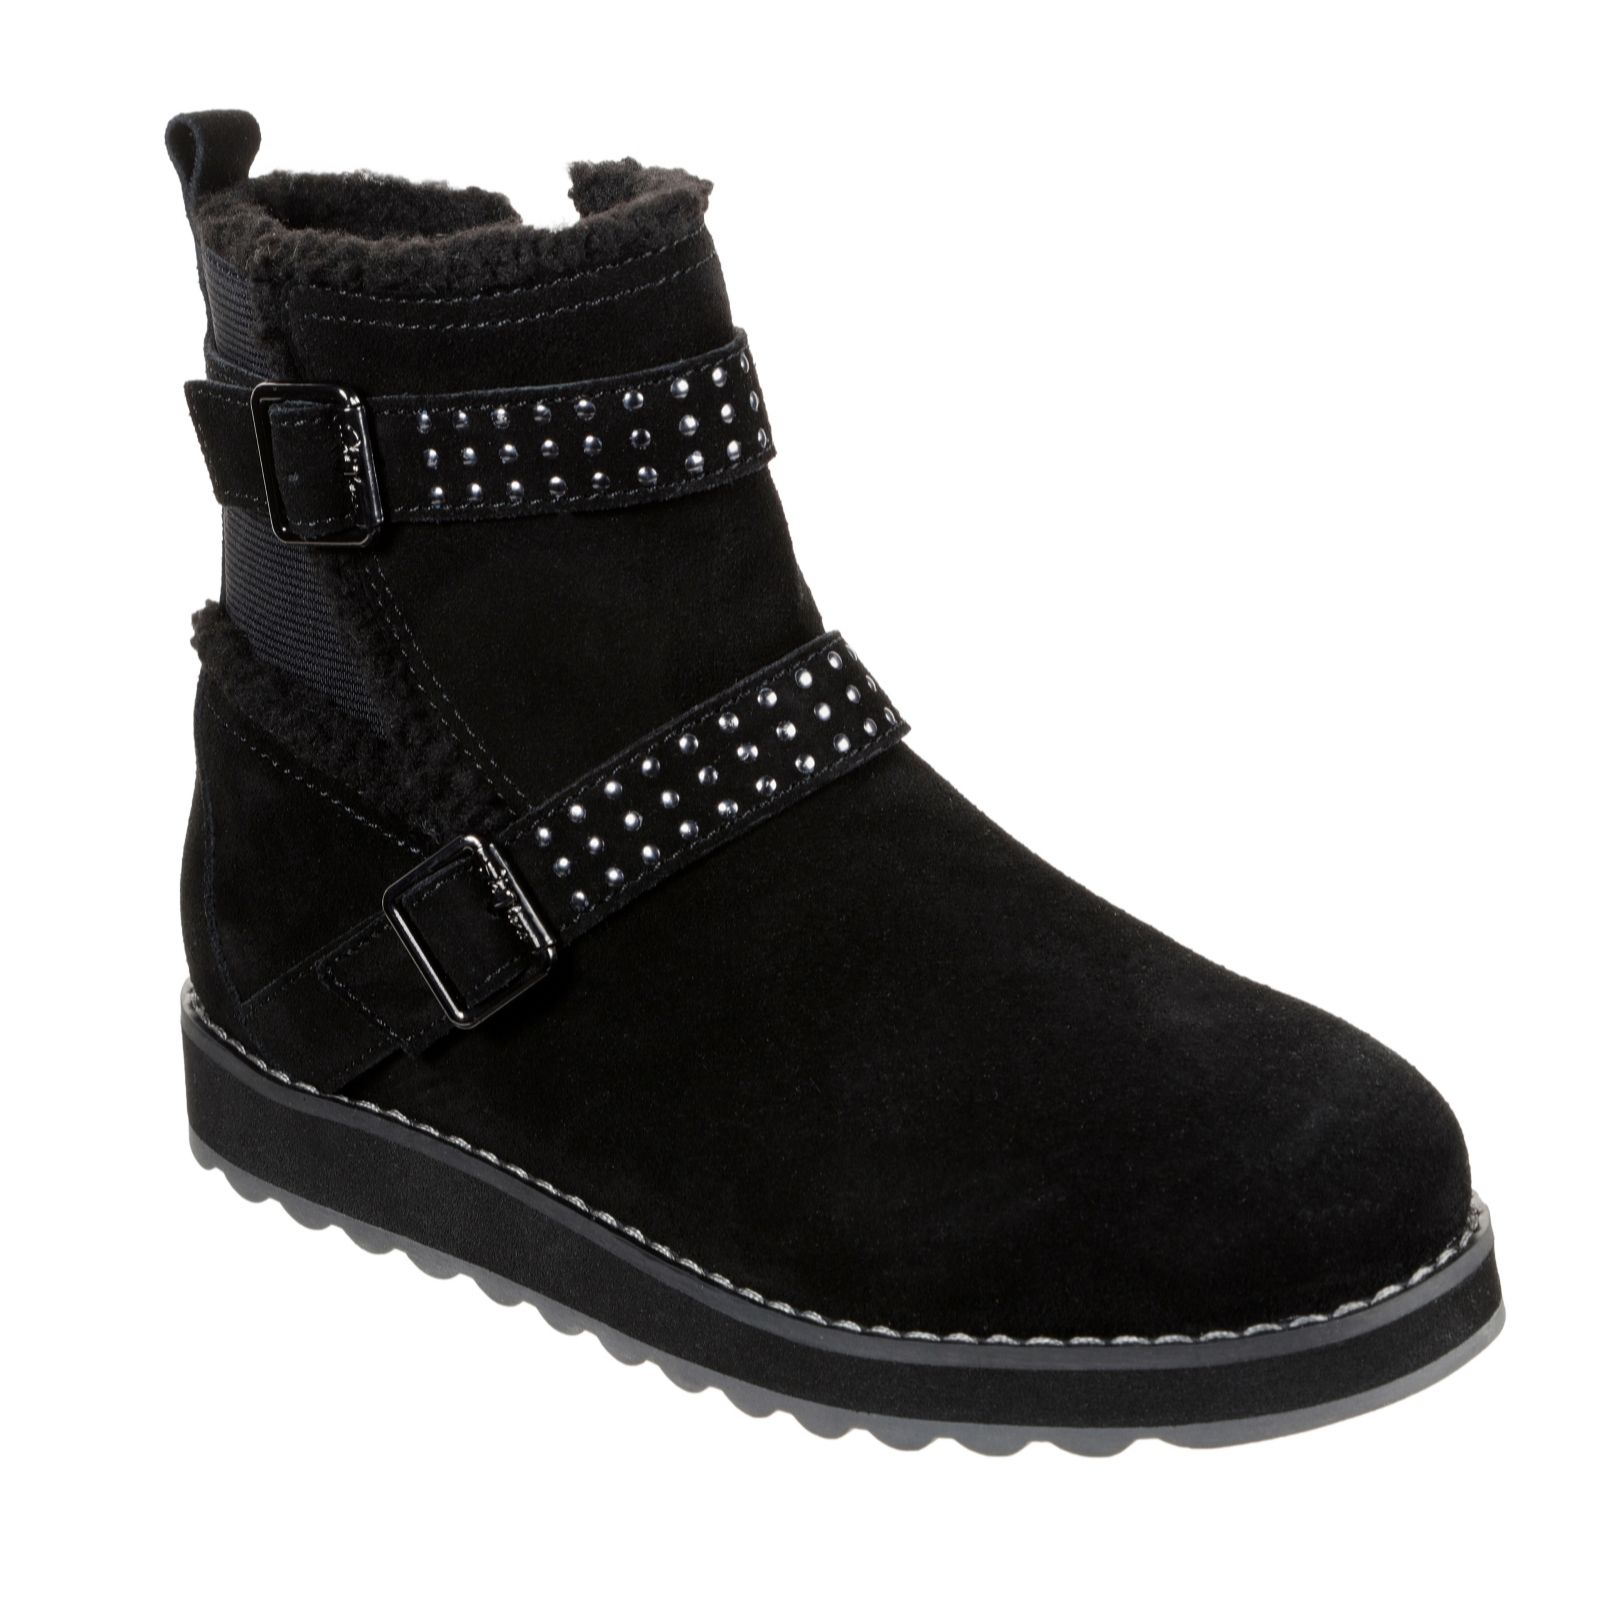 skechers keepsakes mid calf double buckle boot with studs